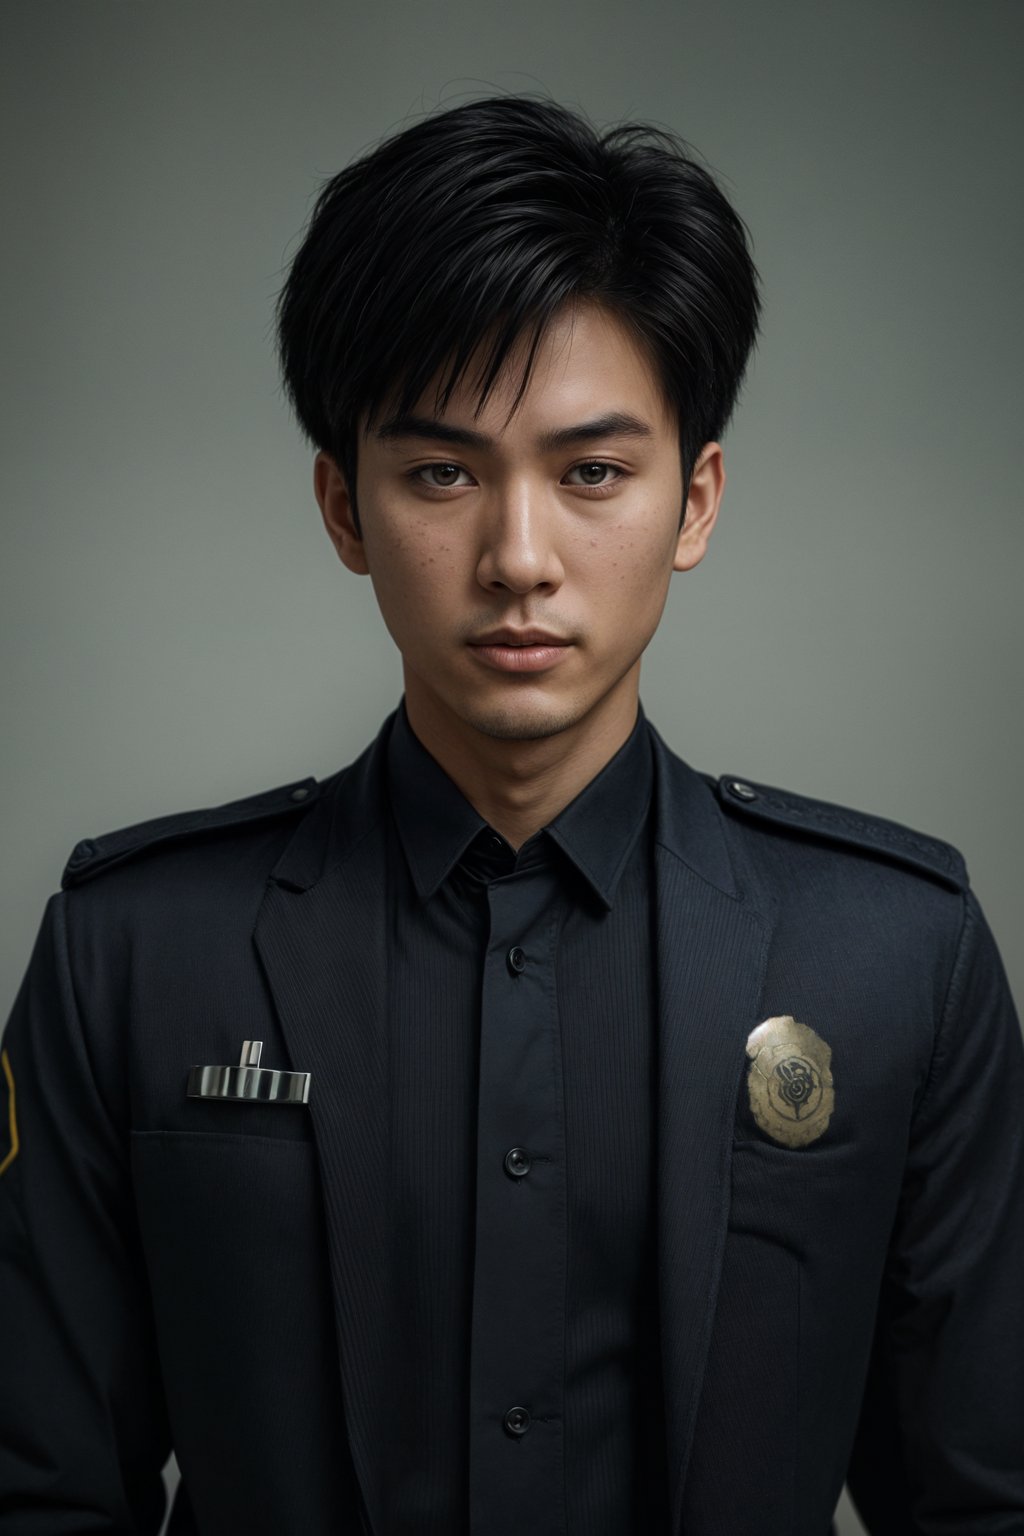 man as a Police Officer